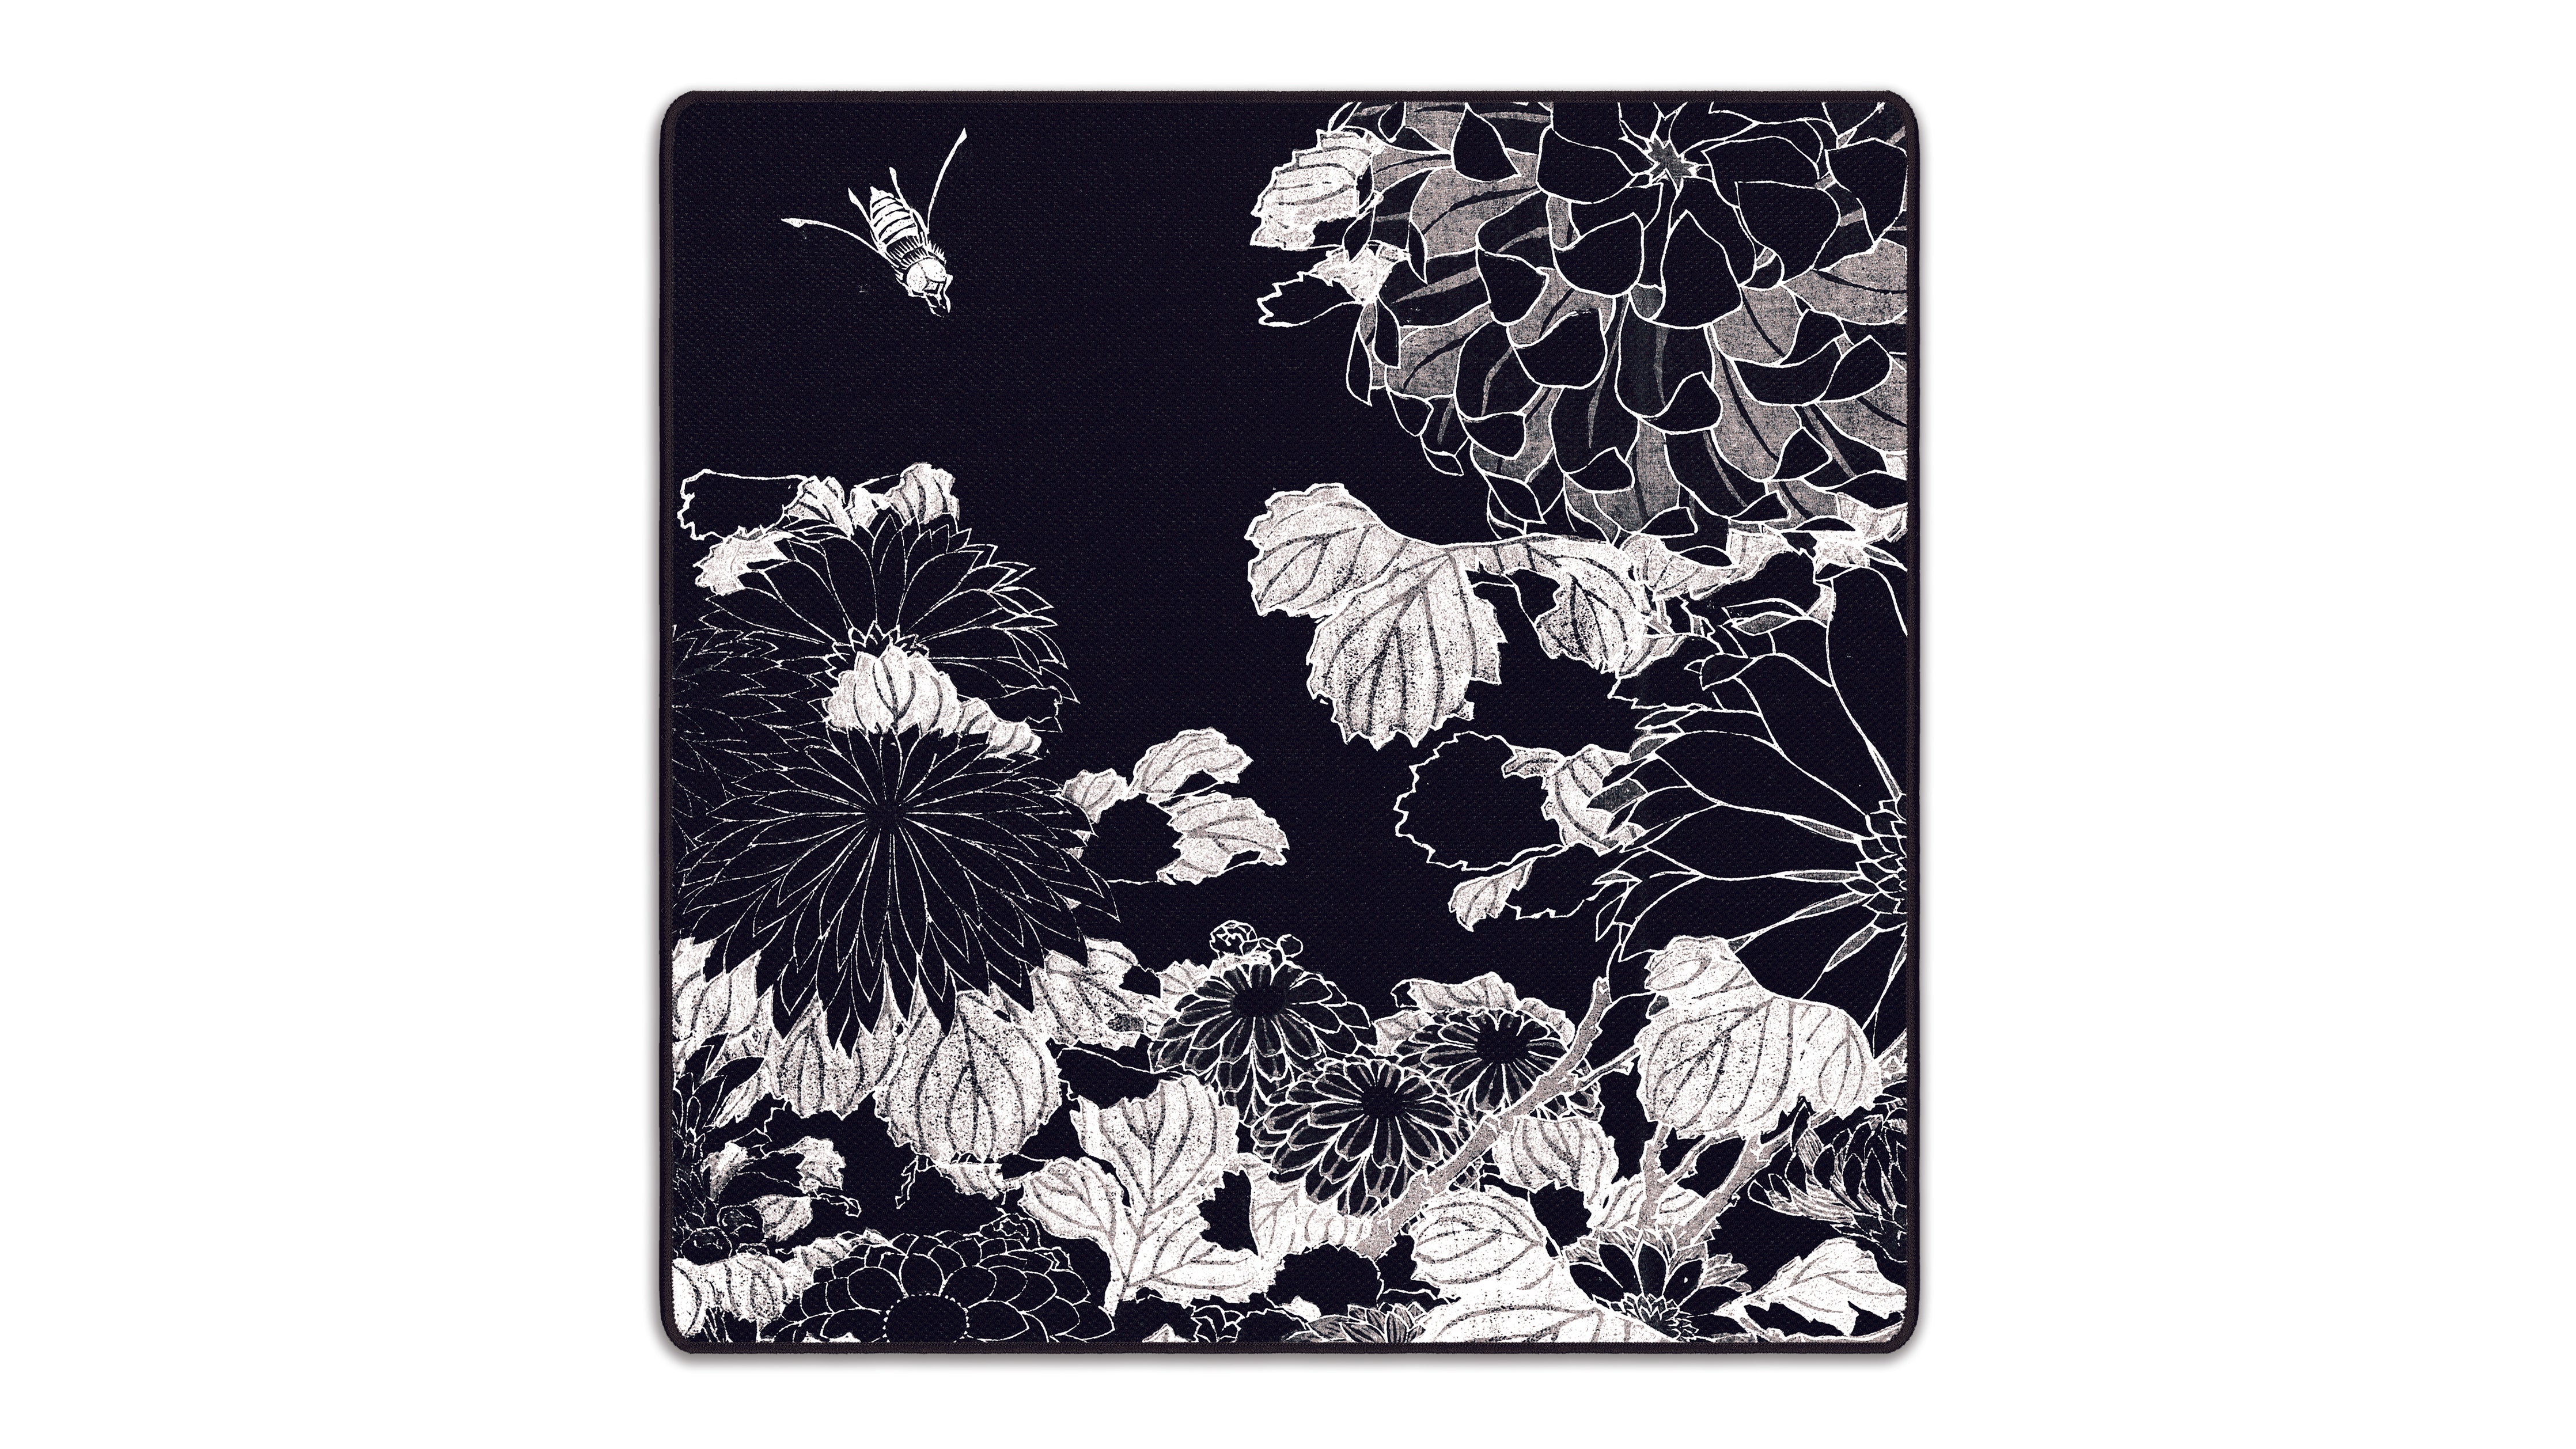 Chrysanthemums and Bee, by Hokusai - The Mousepad Company